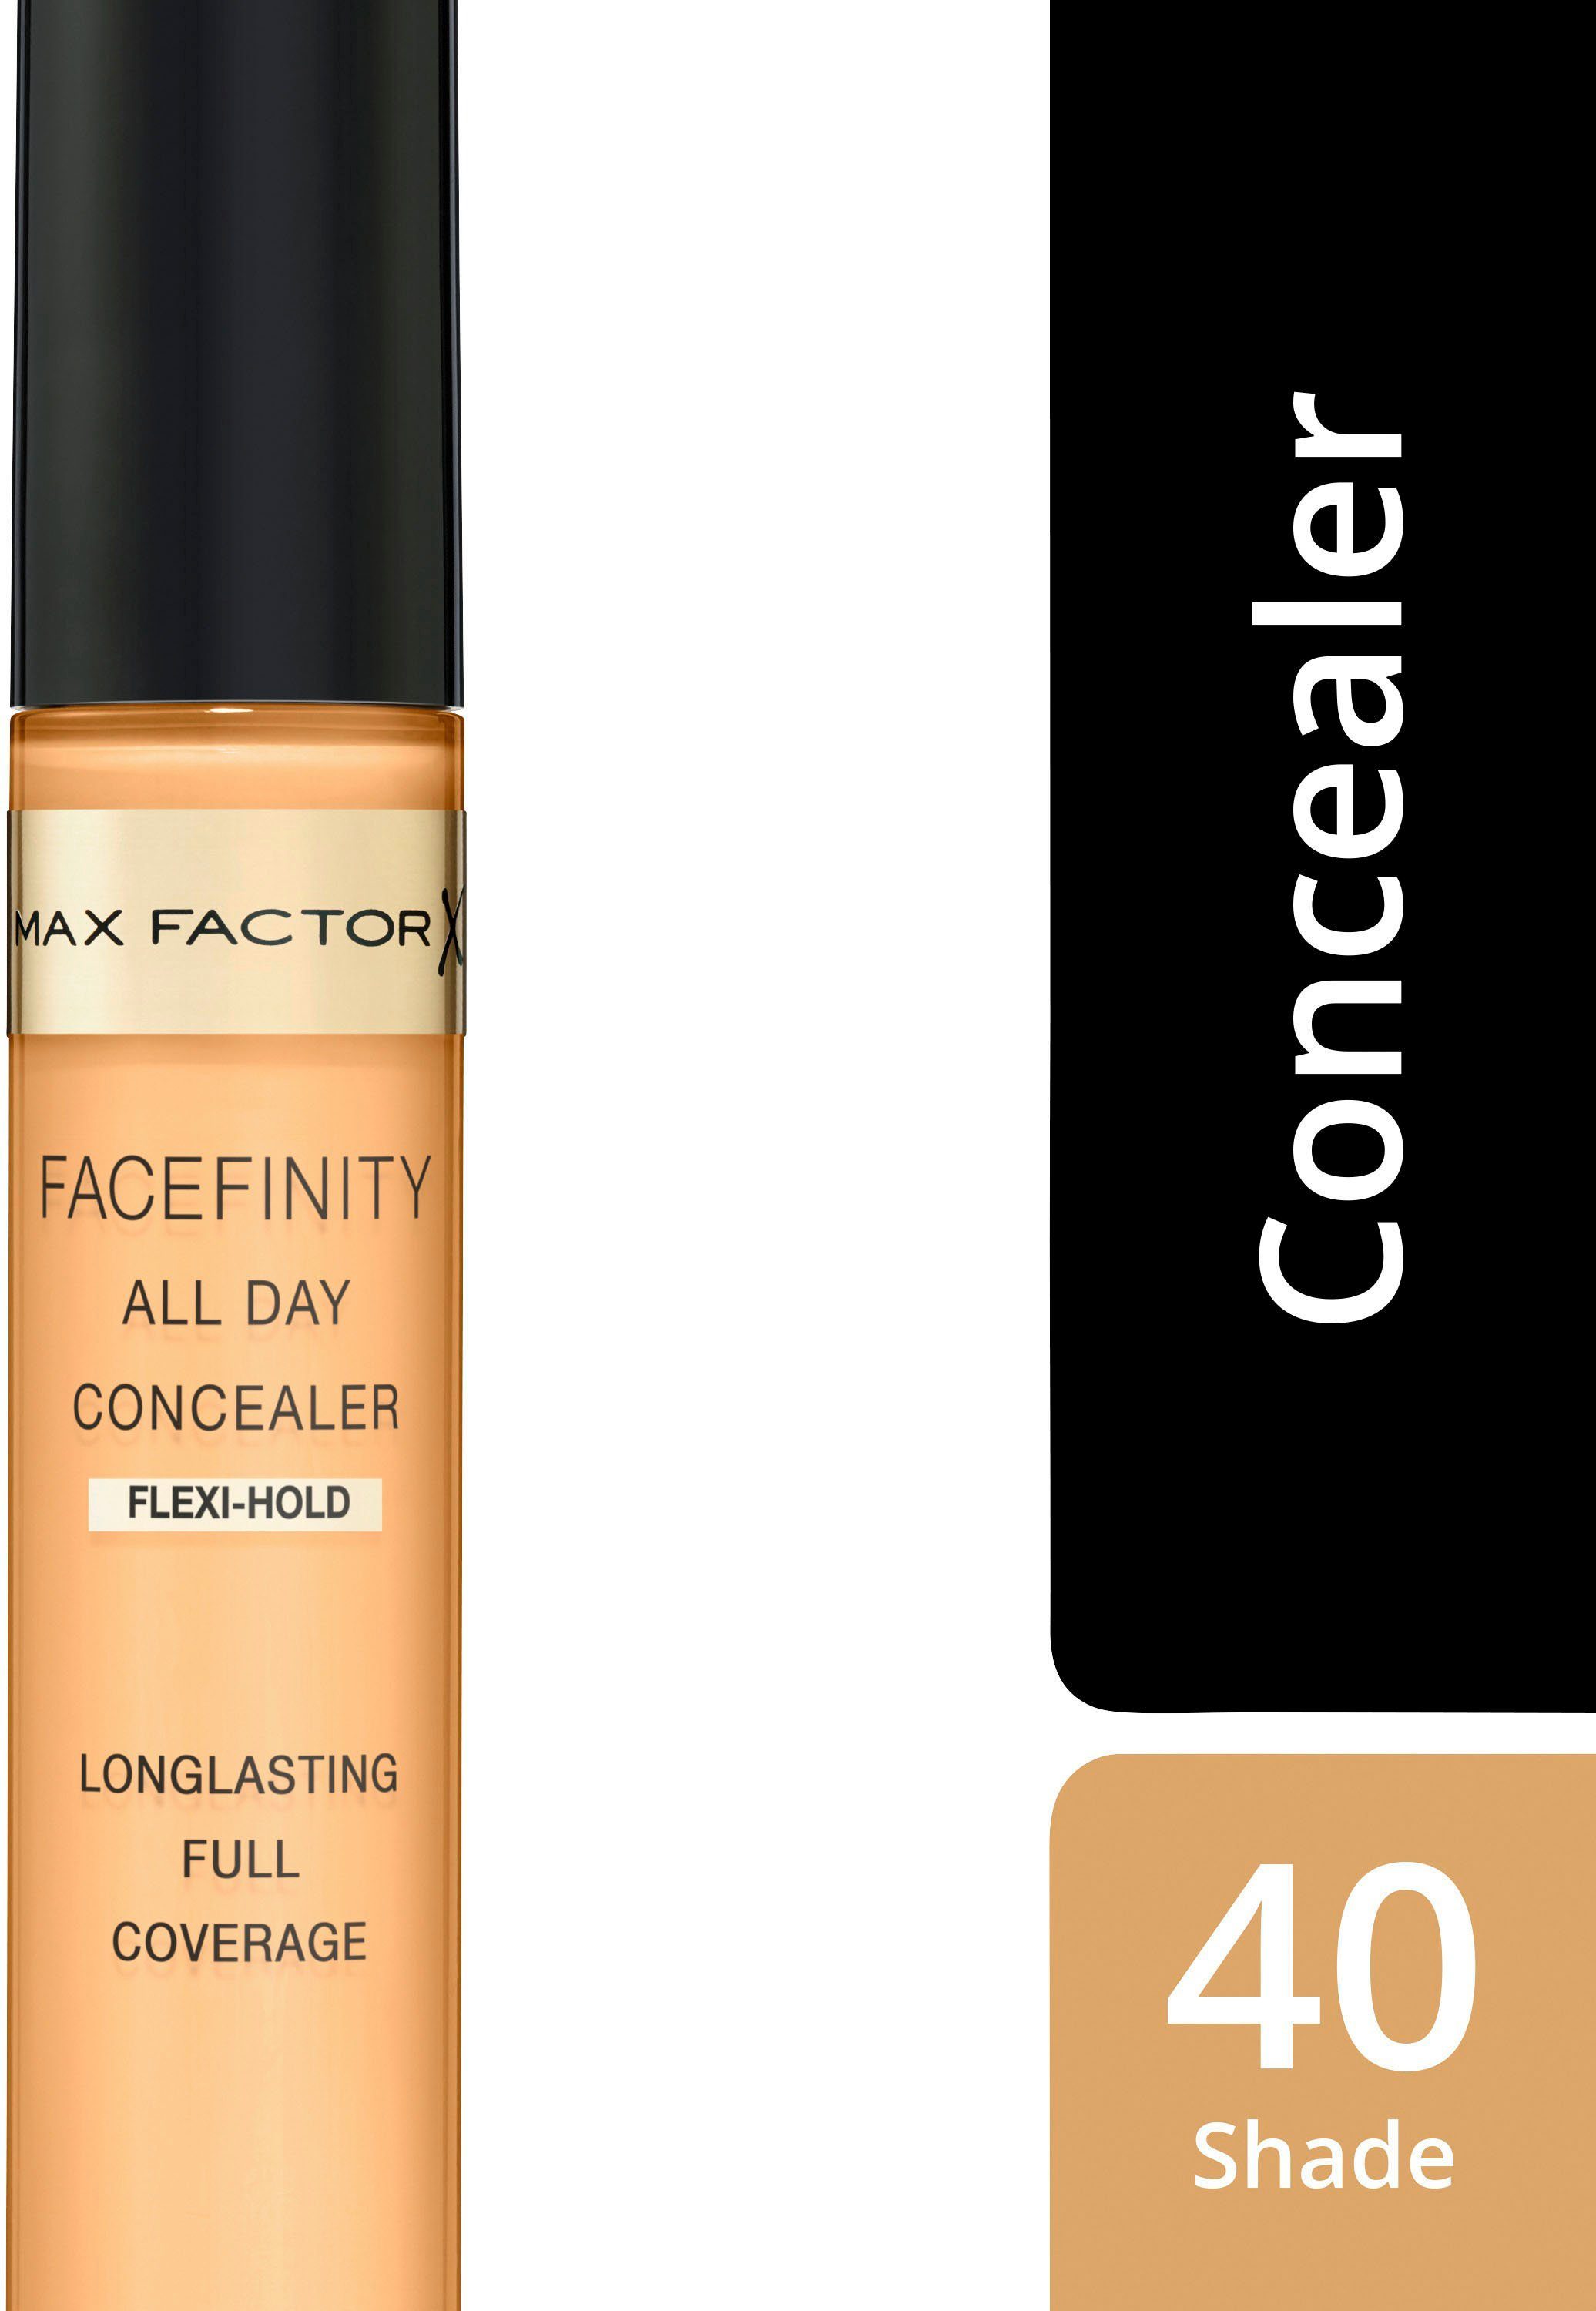 MAX FACTOR Concealer FACEFINITY Flawless 40 Day All